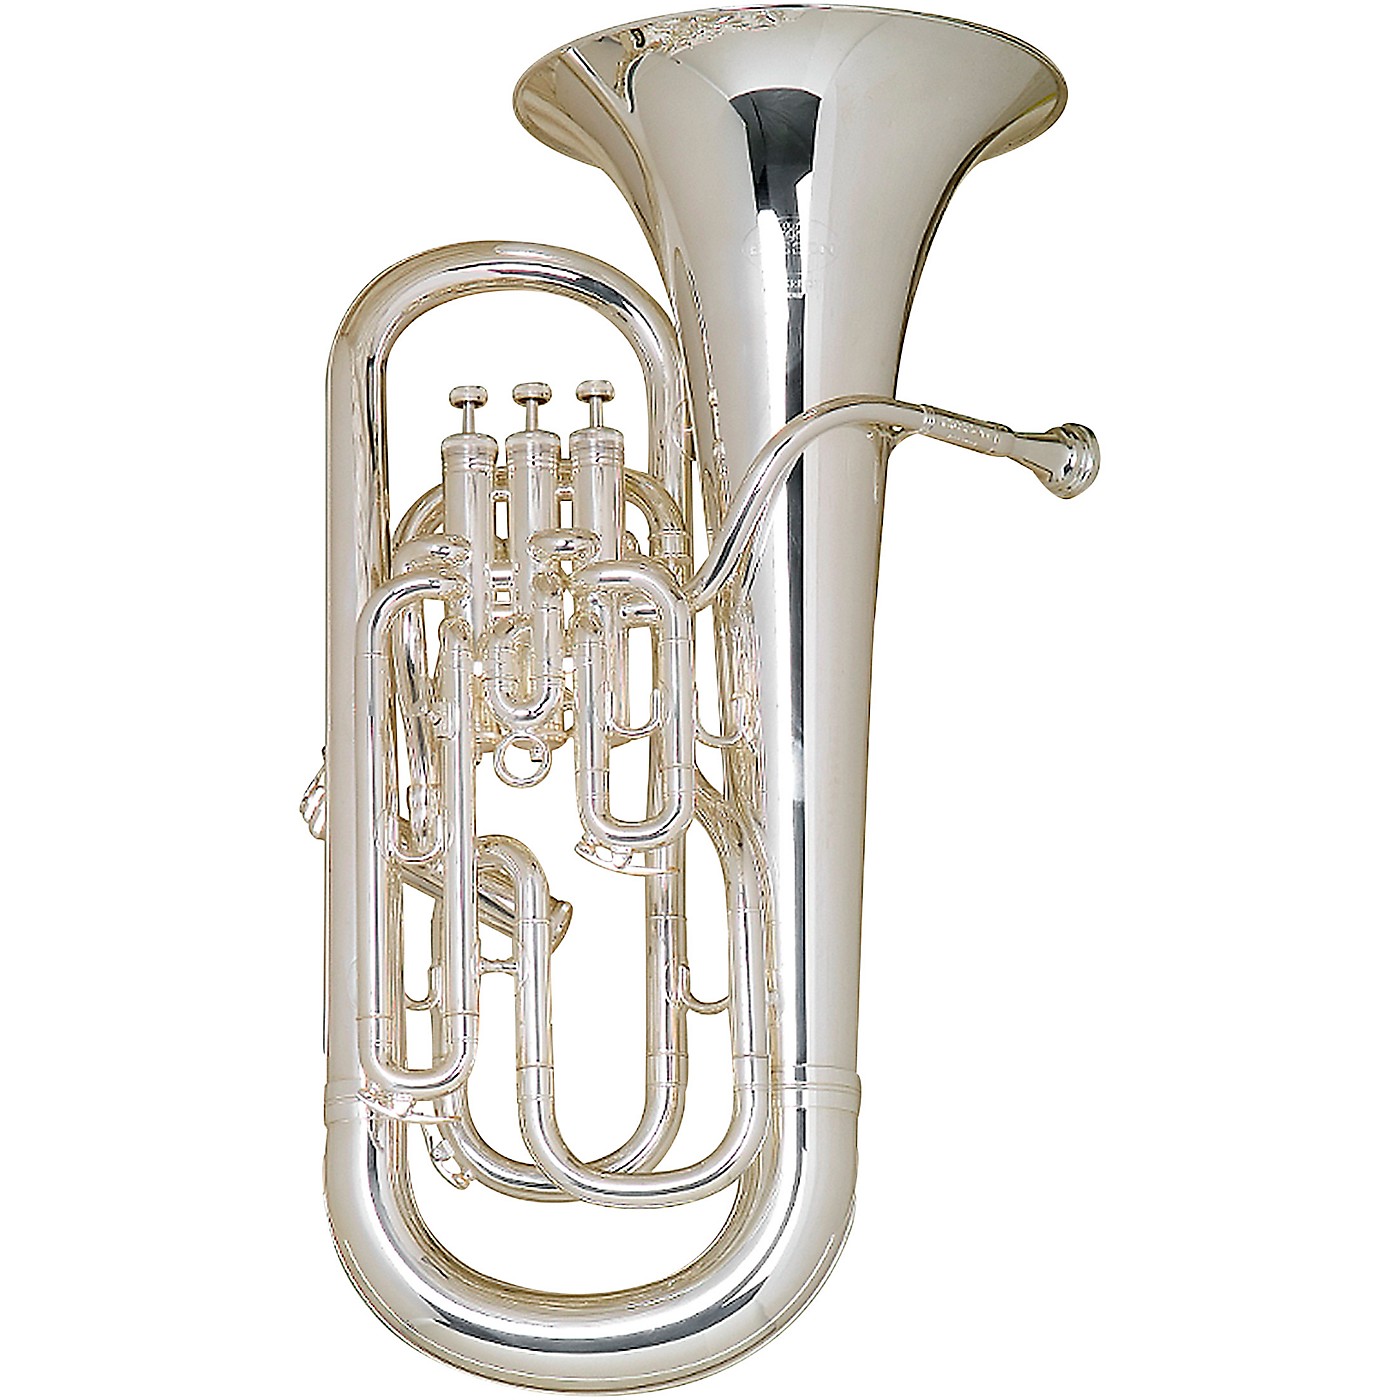 Besson BE967 Sovereign Series Silver Compensating Euphonium thumbnail